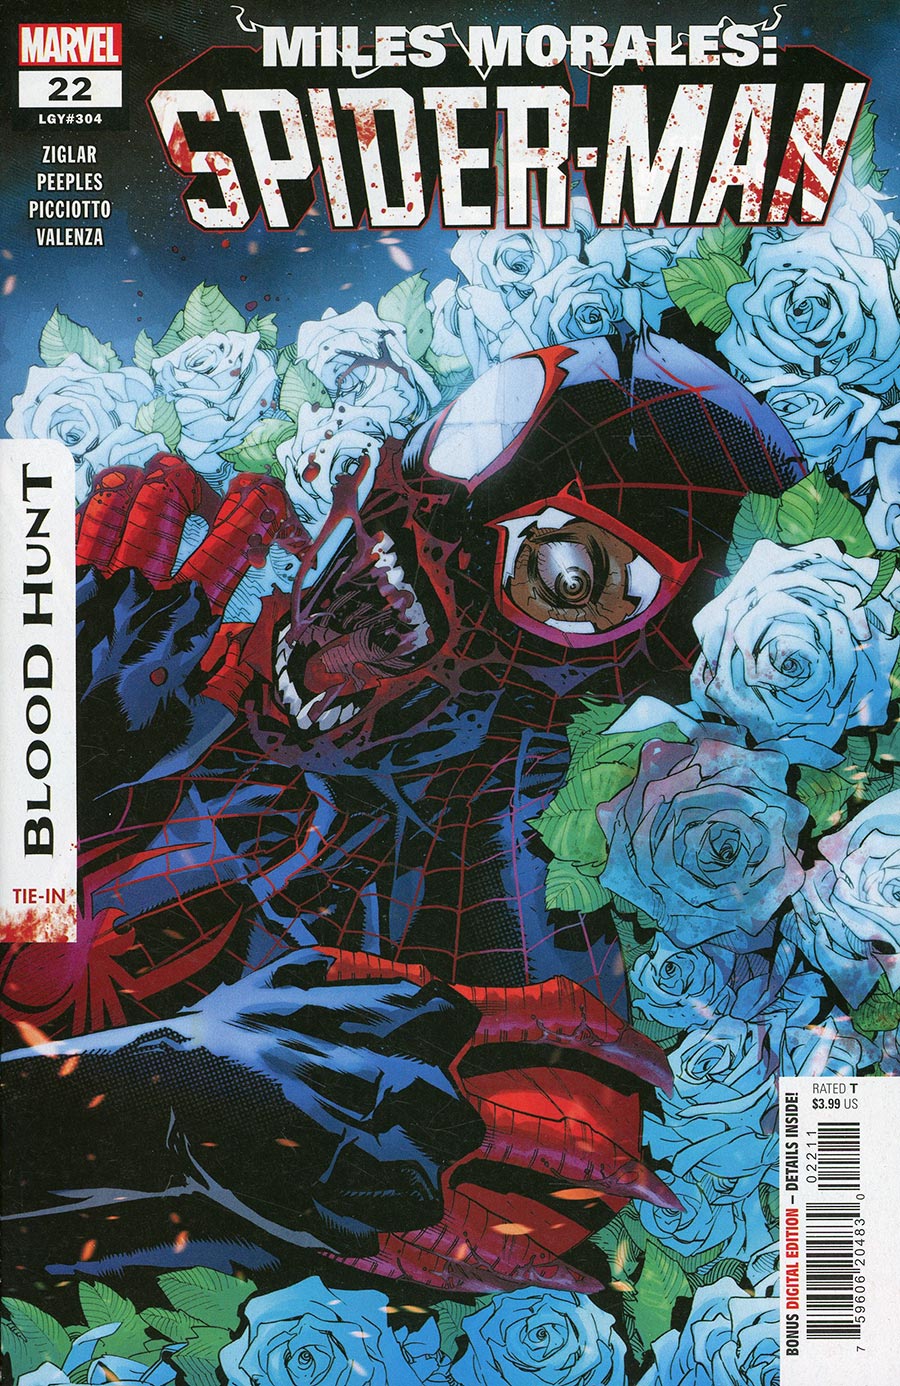 Miles Morales Spider-Man Vol 2 #22 Cover A Regular Federico Vicentini Cover (Blood Hunt Tie-In)